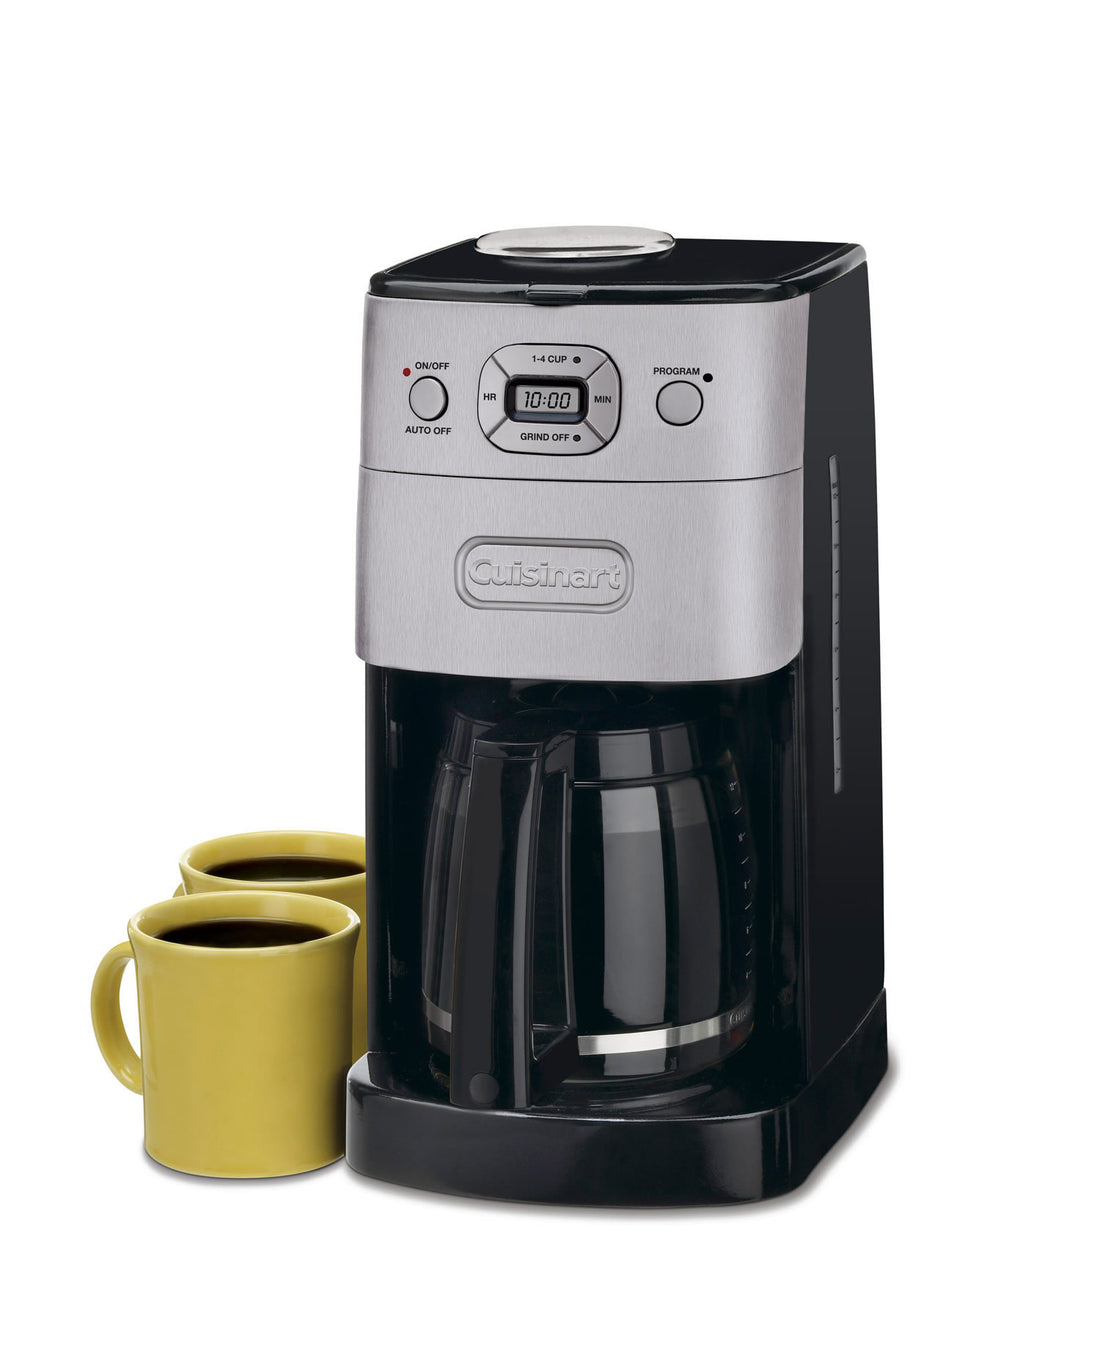 10-Cup Automatic Grind & Brew Coffeemaker with Thermal Carafe